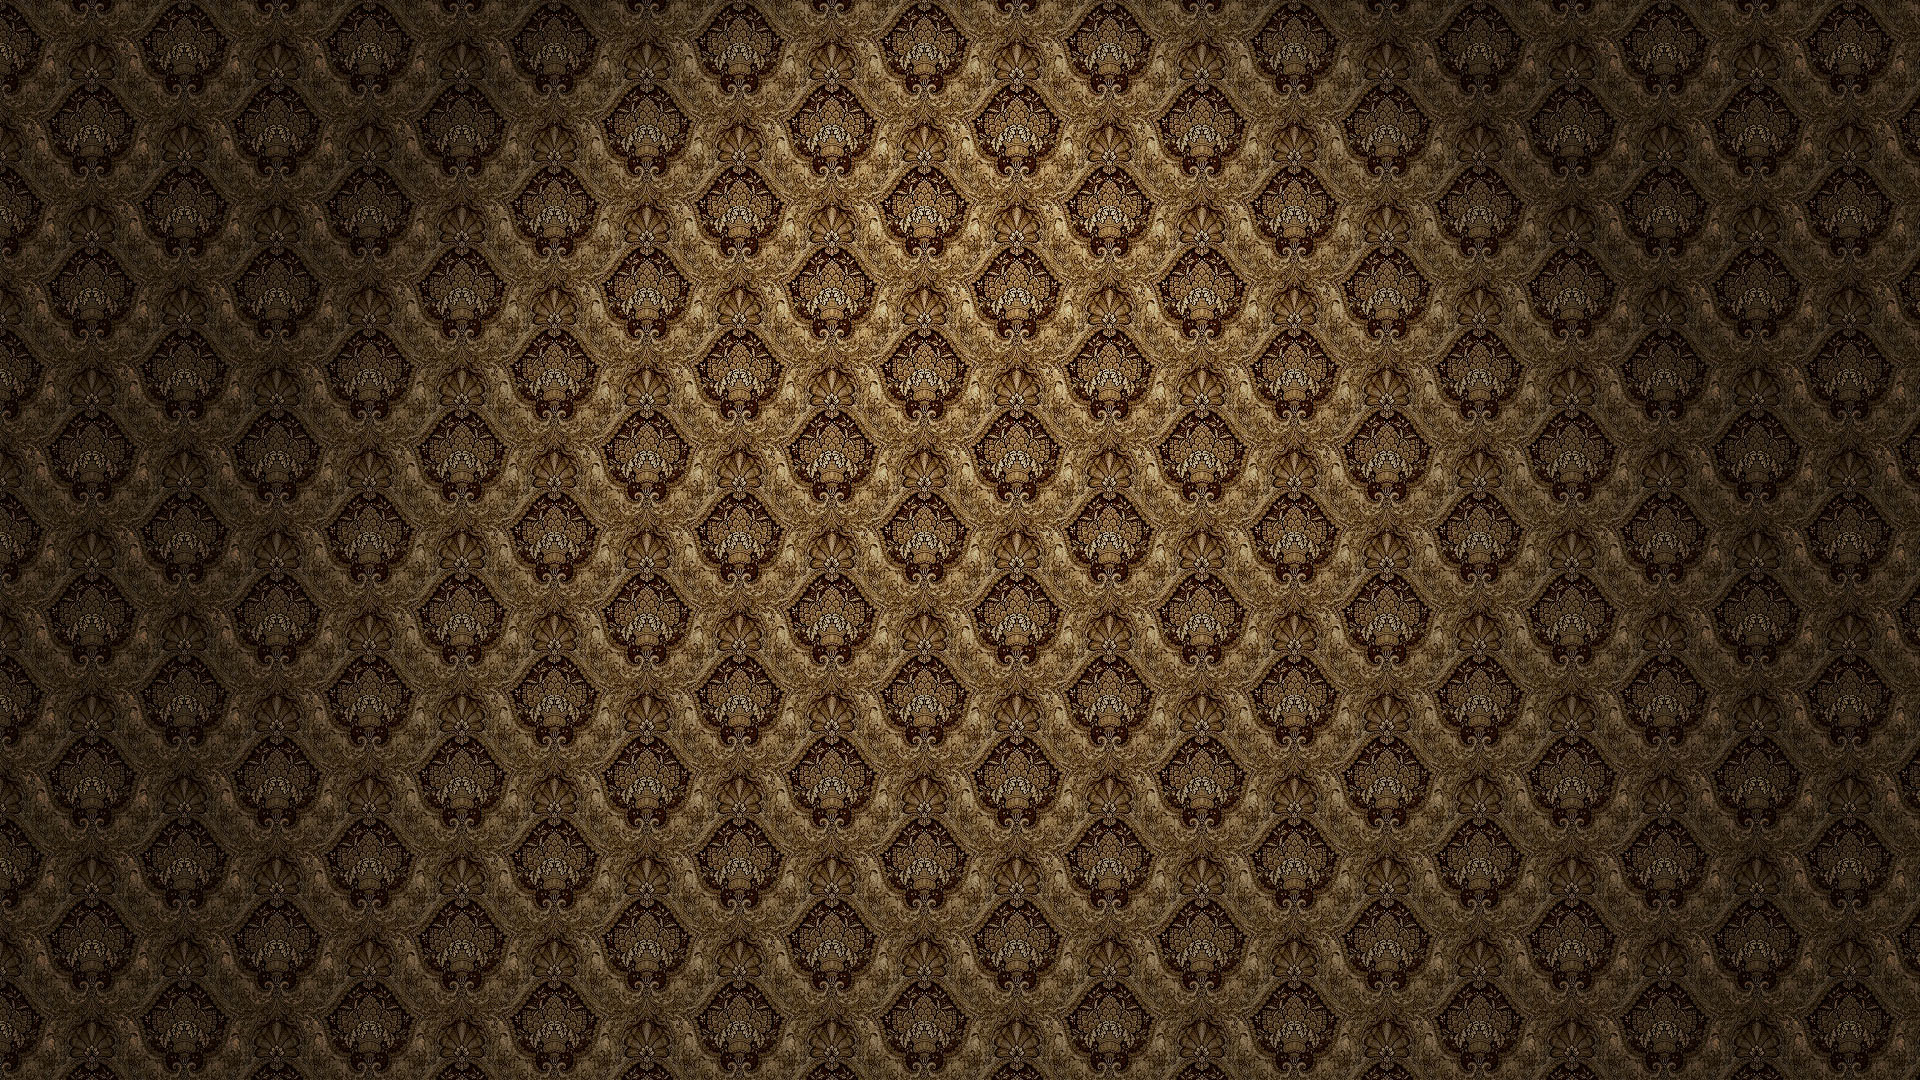 Black and Gold wallpaper 1920x1080 73949 1920x1080